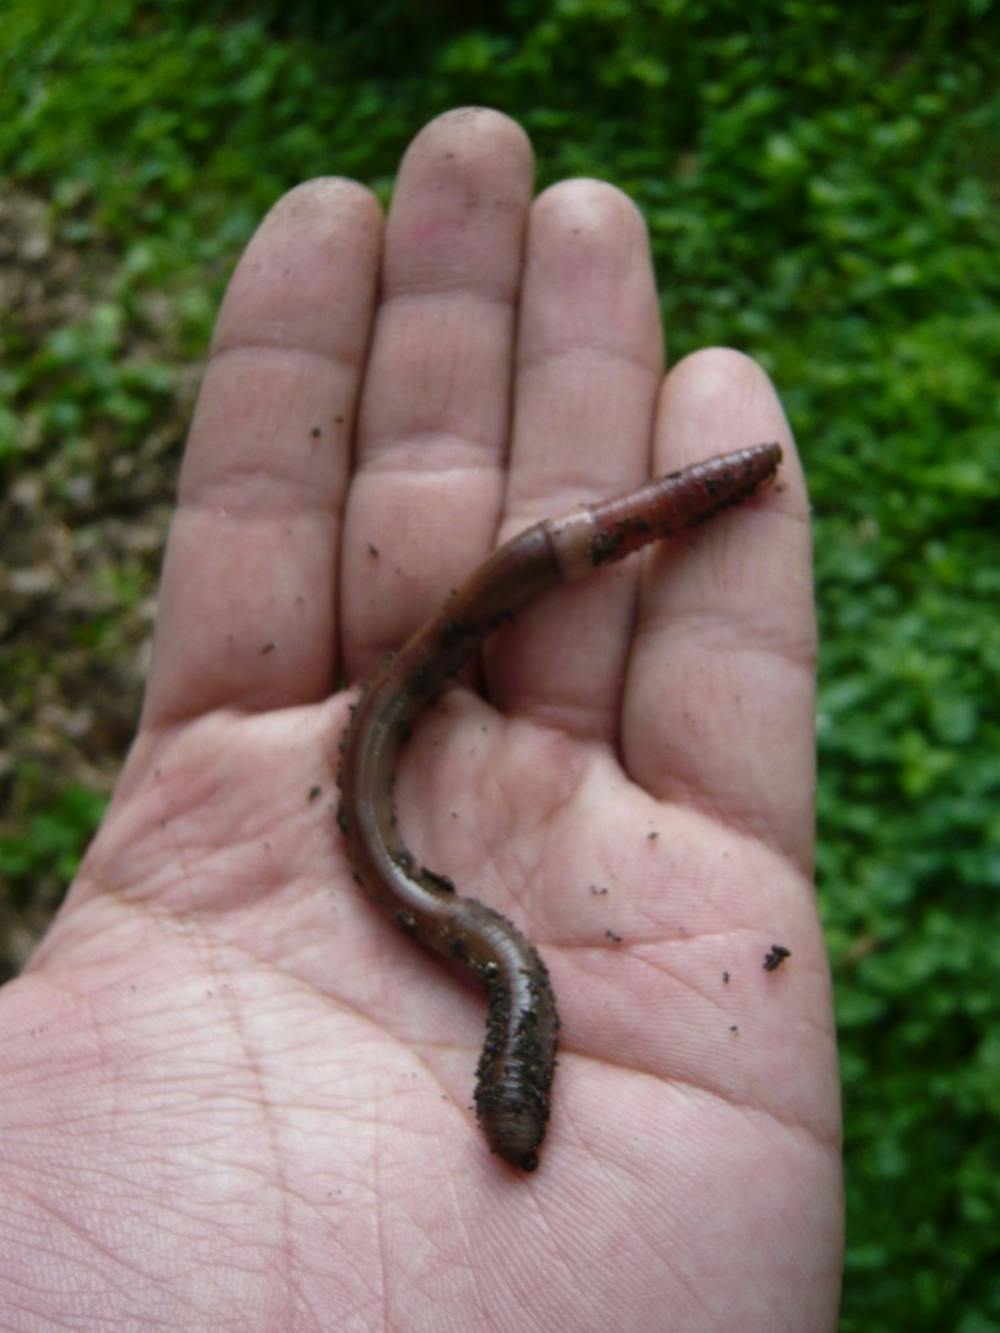 Asian jumping worms wiggle uniquely compared to other earthworms when touched or disturbed.&nbsp;